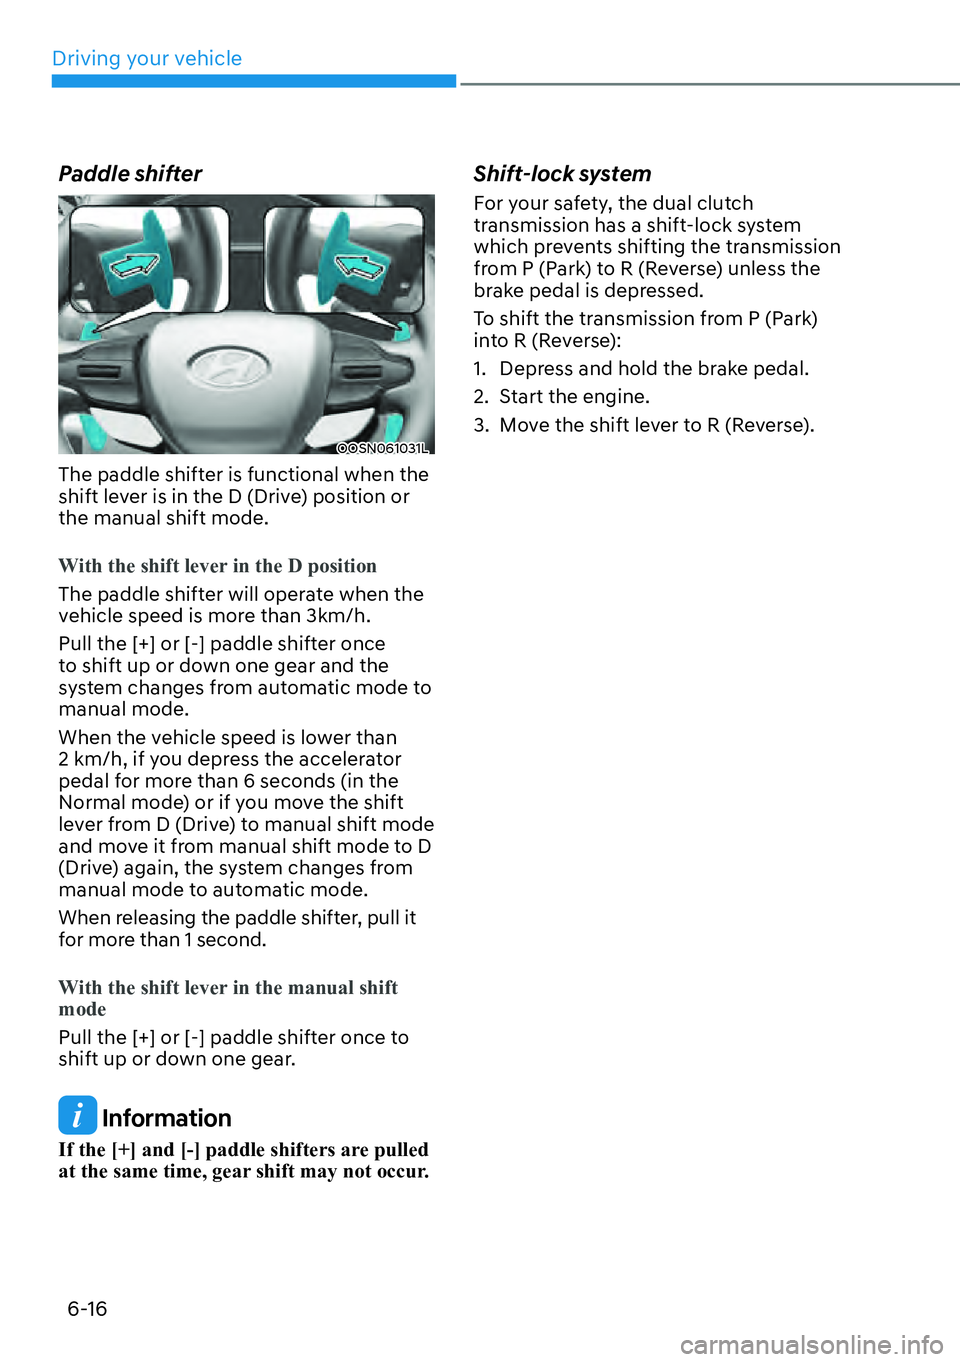 HYUNDAI KONA 2023  Owners Manual Driving your vehicle6-16
Paddle shifter
OOSN061031L
The paddle shifter is functional when the 
shift lever is in the D (Drive) position or 
the manual shift mode.
With the shift lever in the D positio